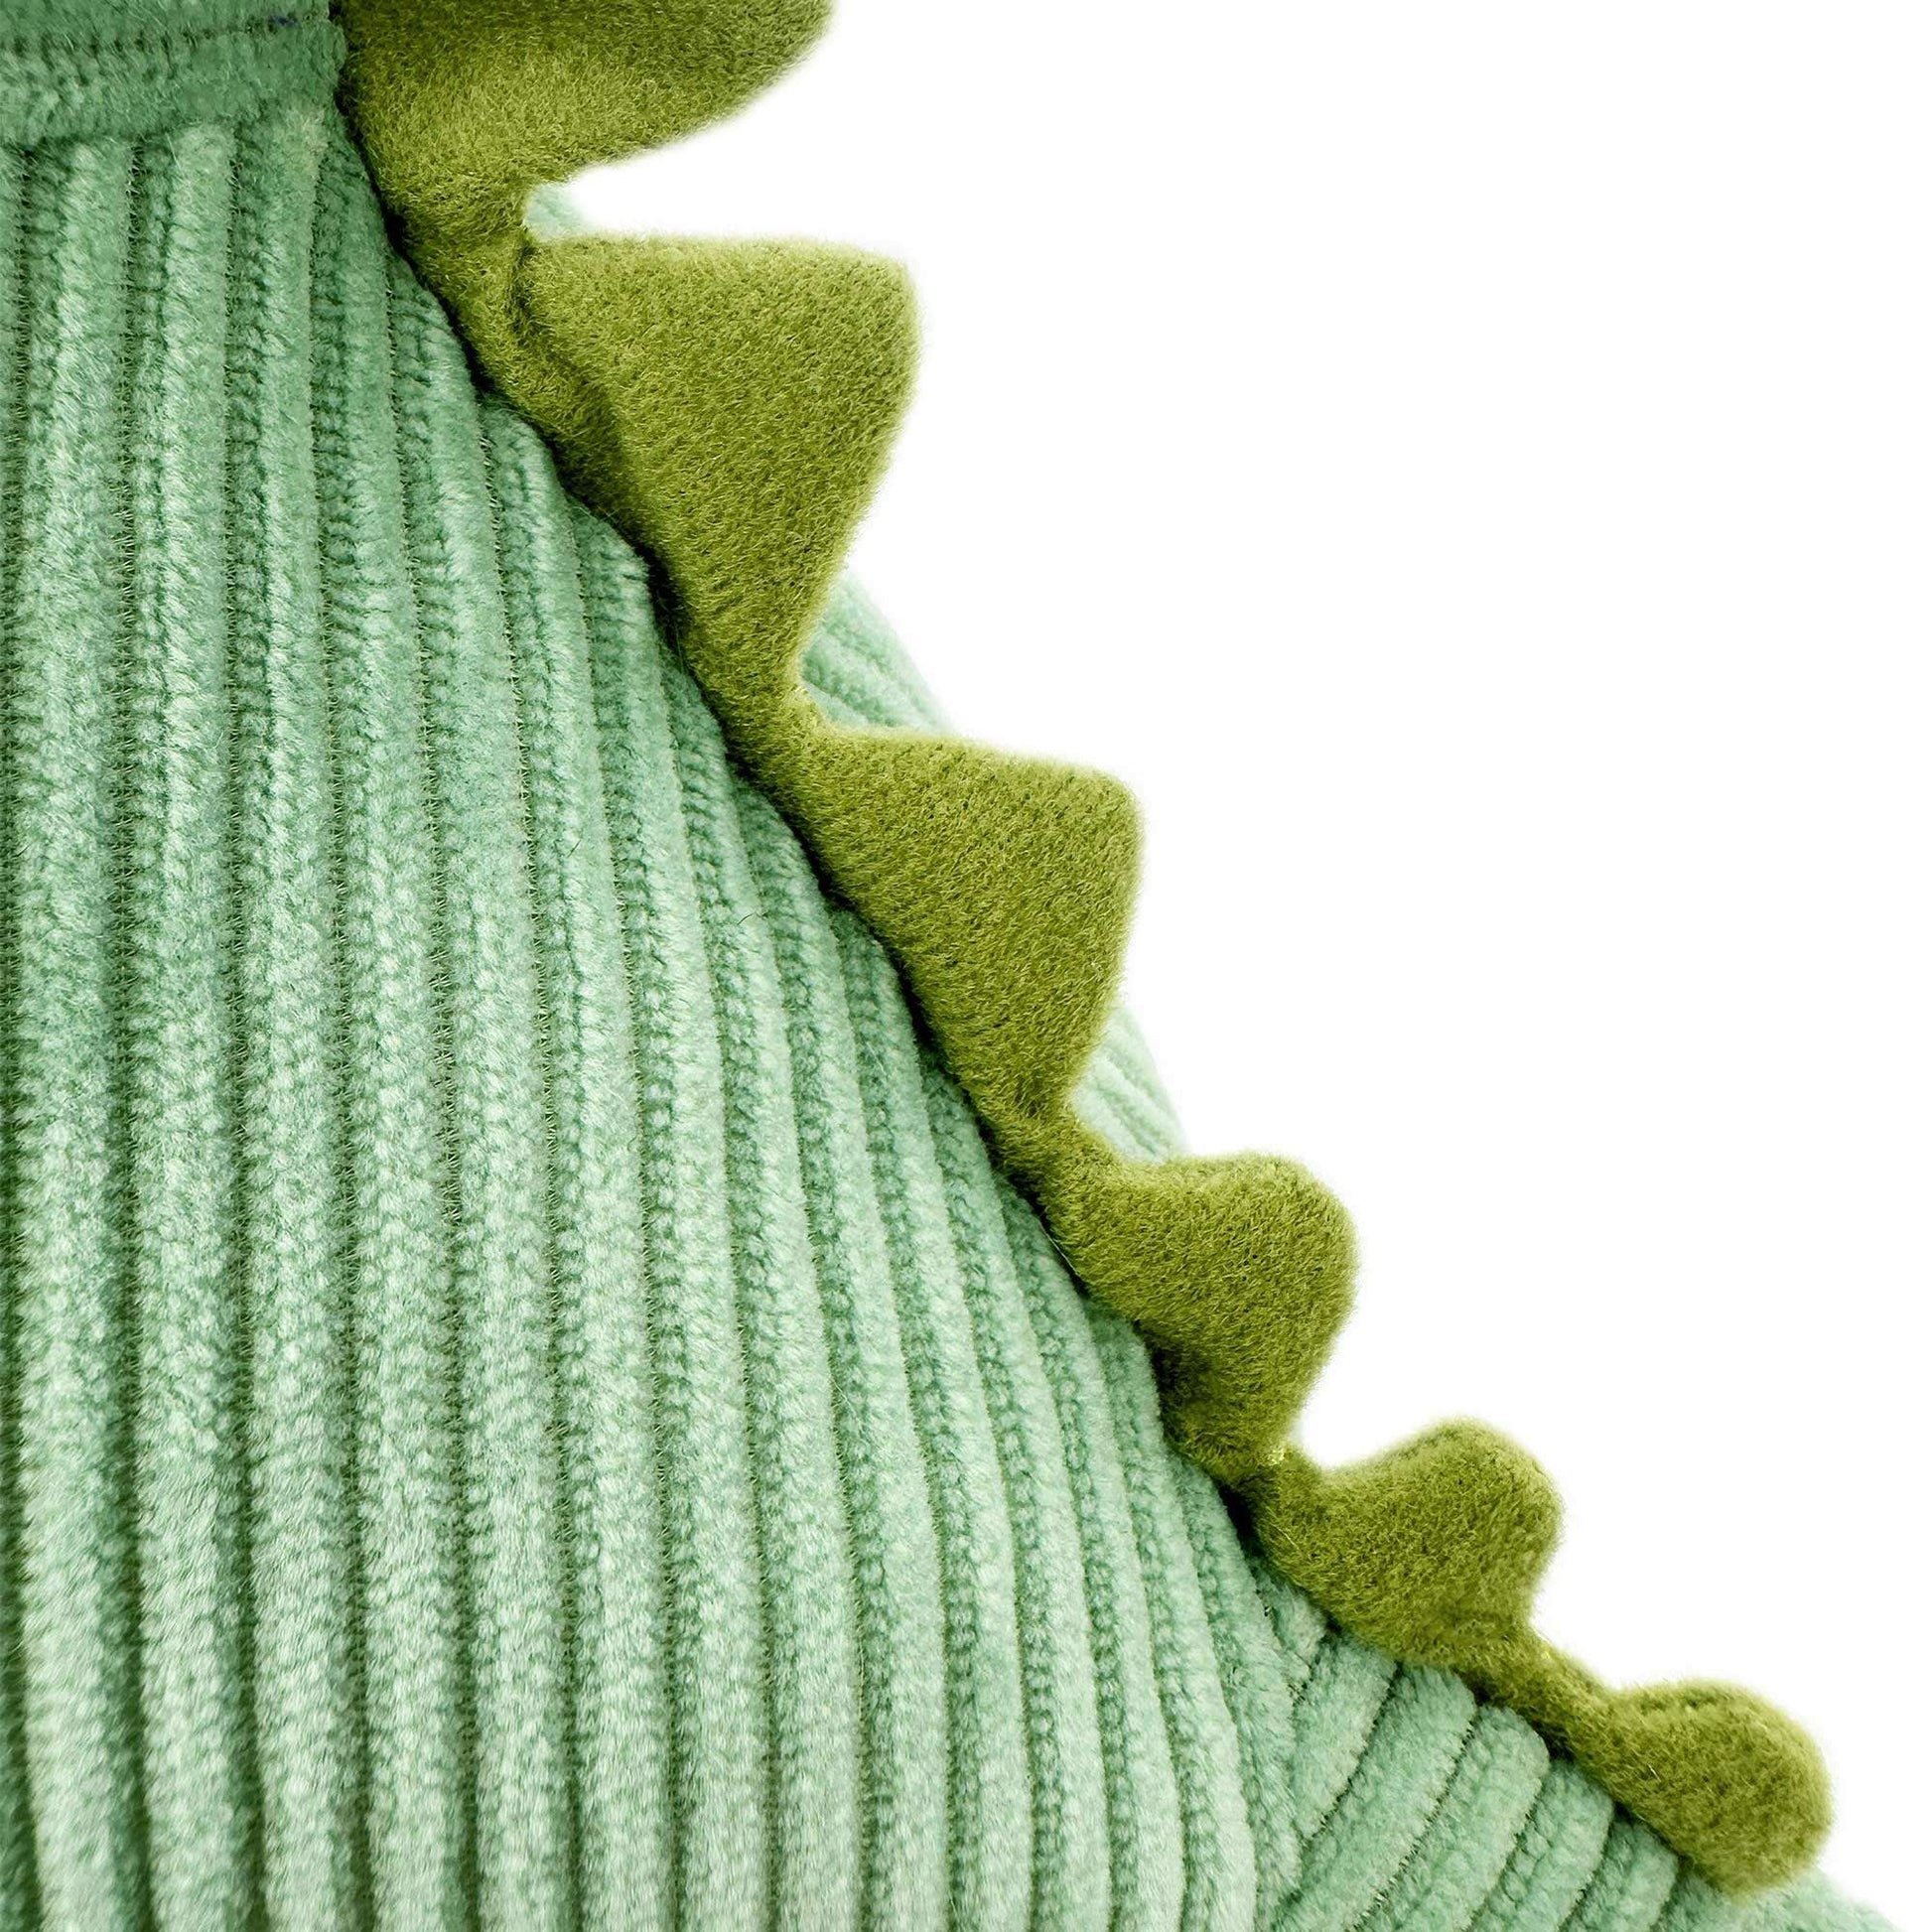 Green crocodile plush toy with spine